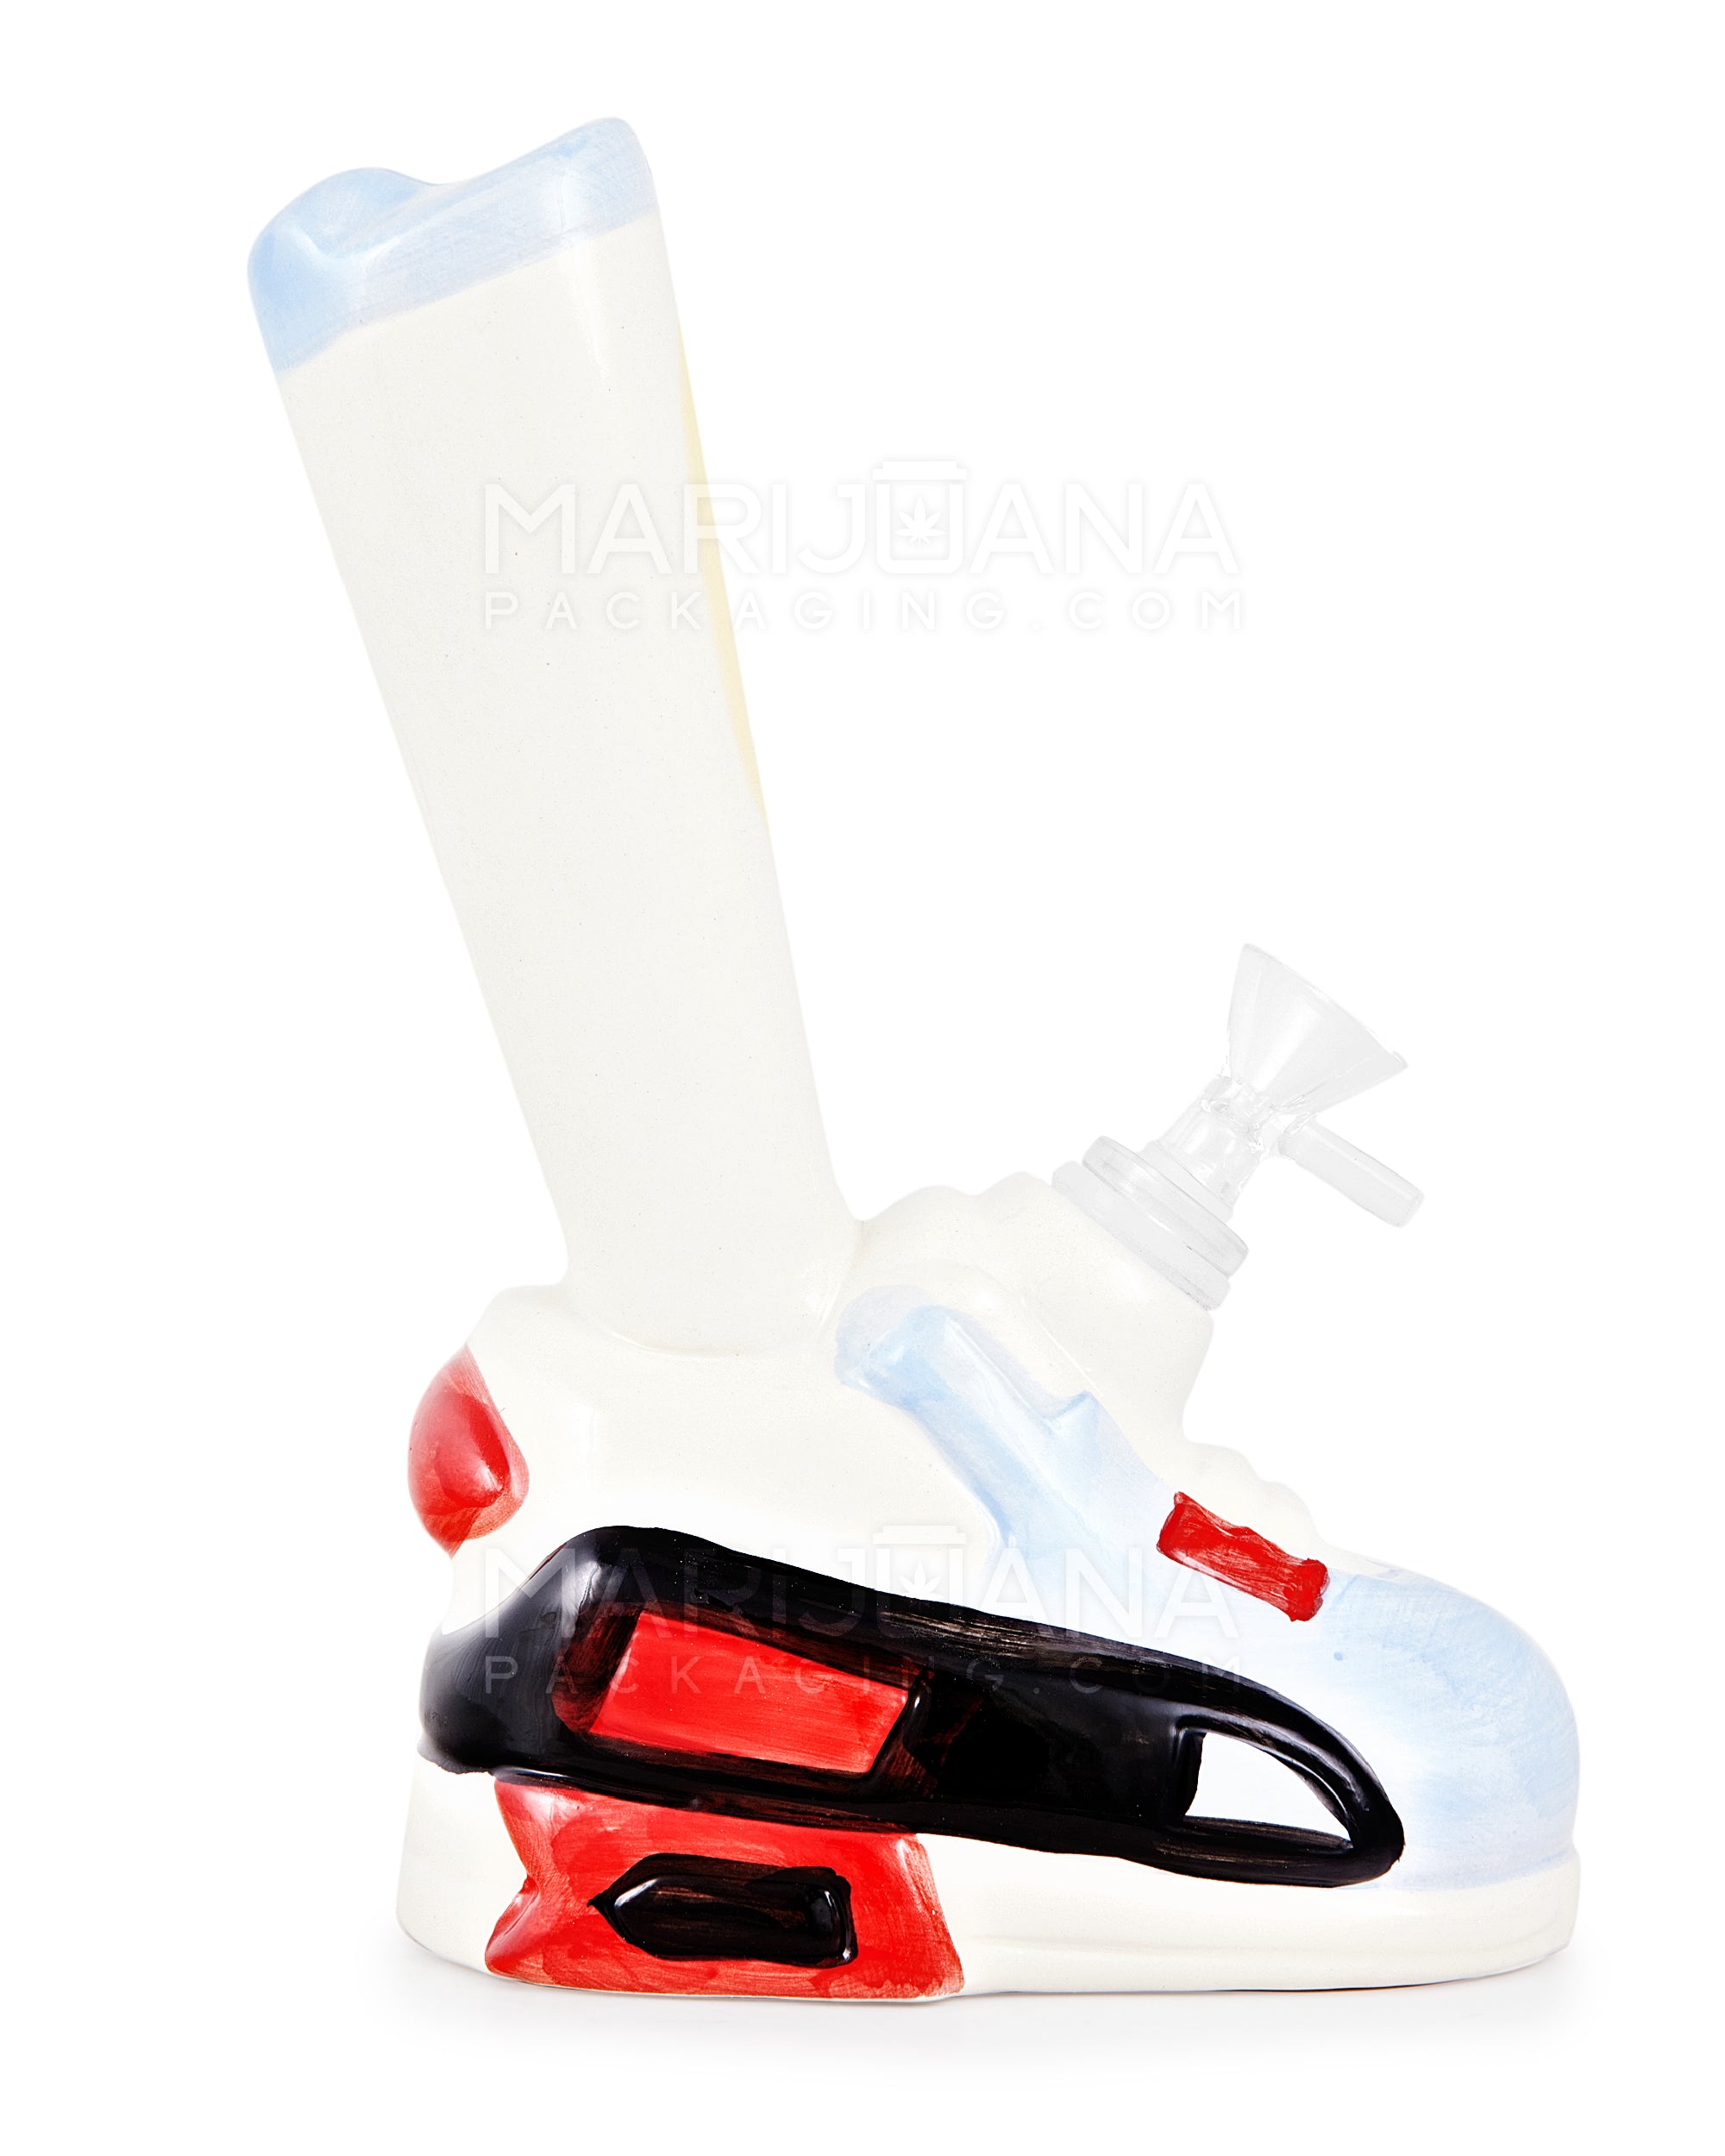 Classic Sneaker Painted Ceramic Pipe | 8.5in Tall - 14mm Bowl - Mixed - 1